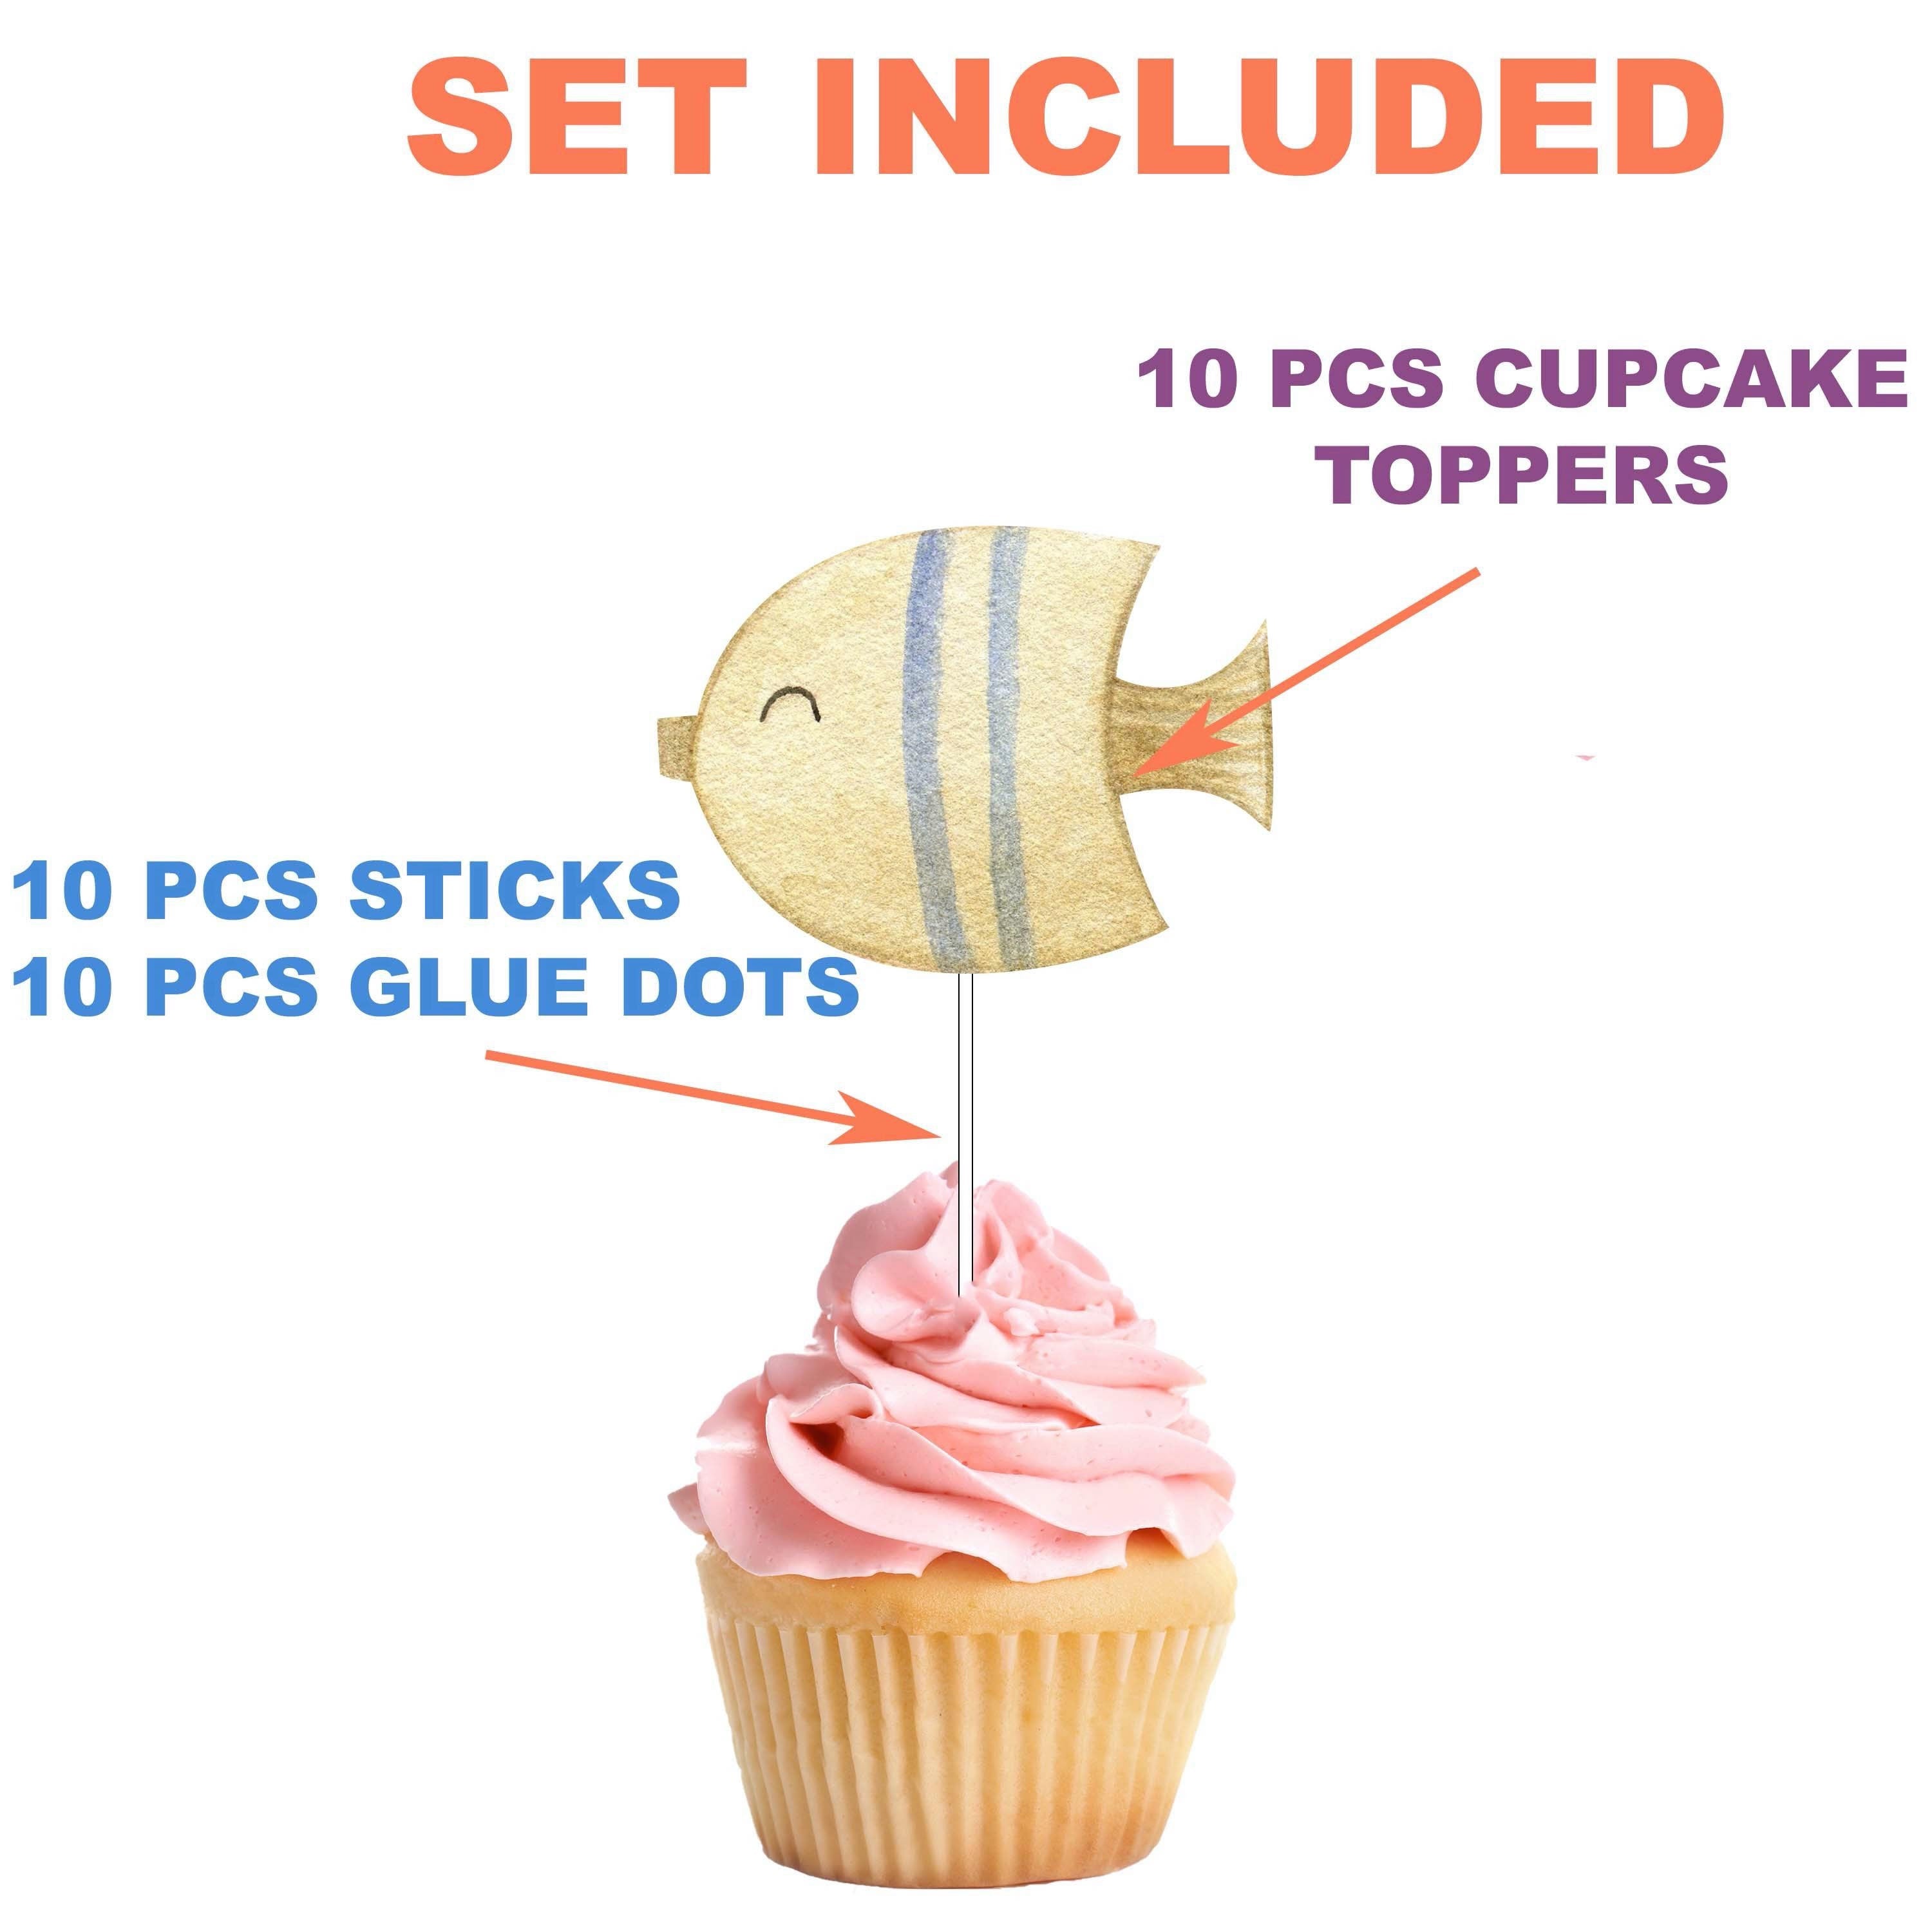 Ocean Adventure Cupcake Toppers - Set of 10 Whimsical Under-the-Sea Decorations for Themed Parties